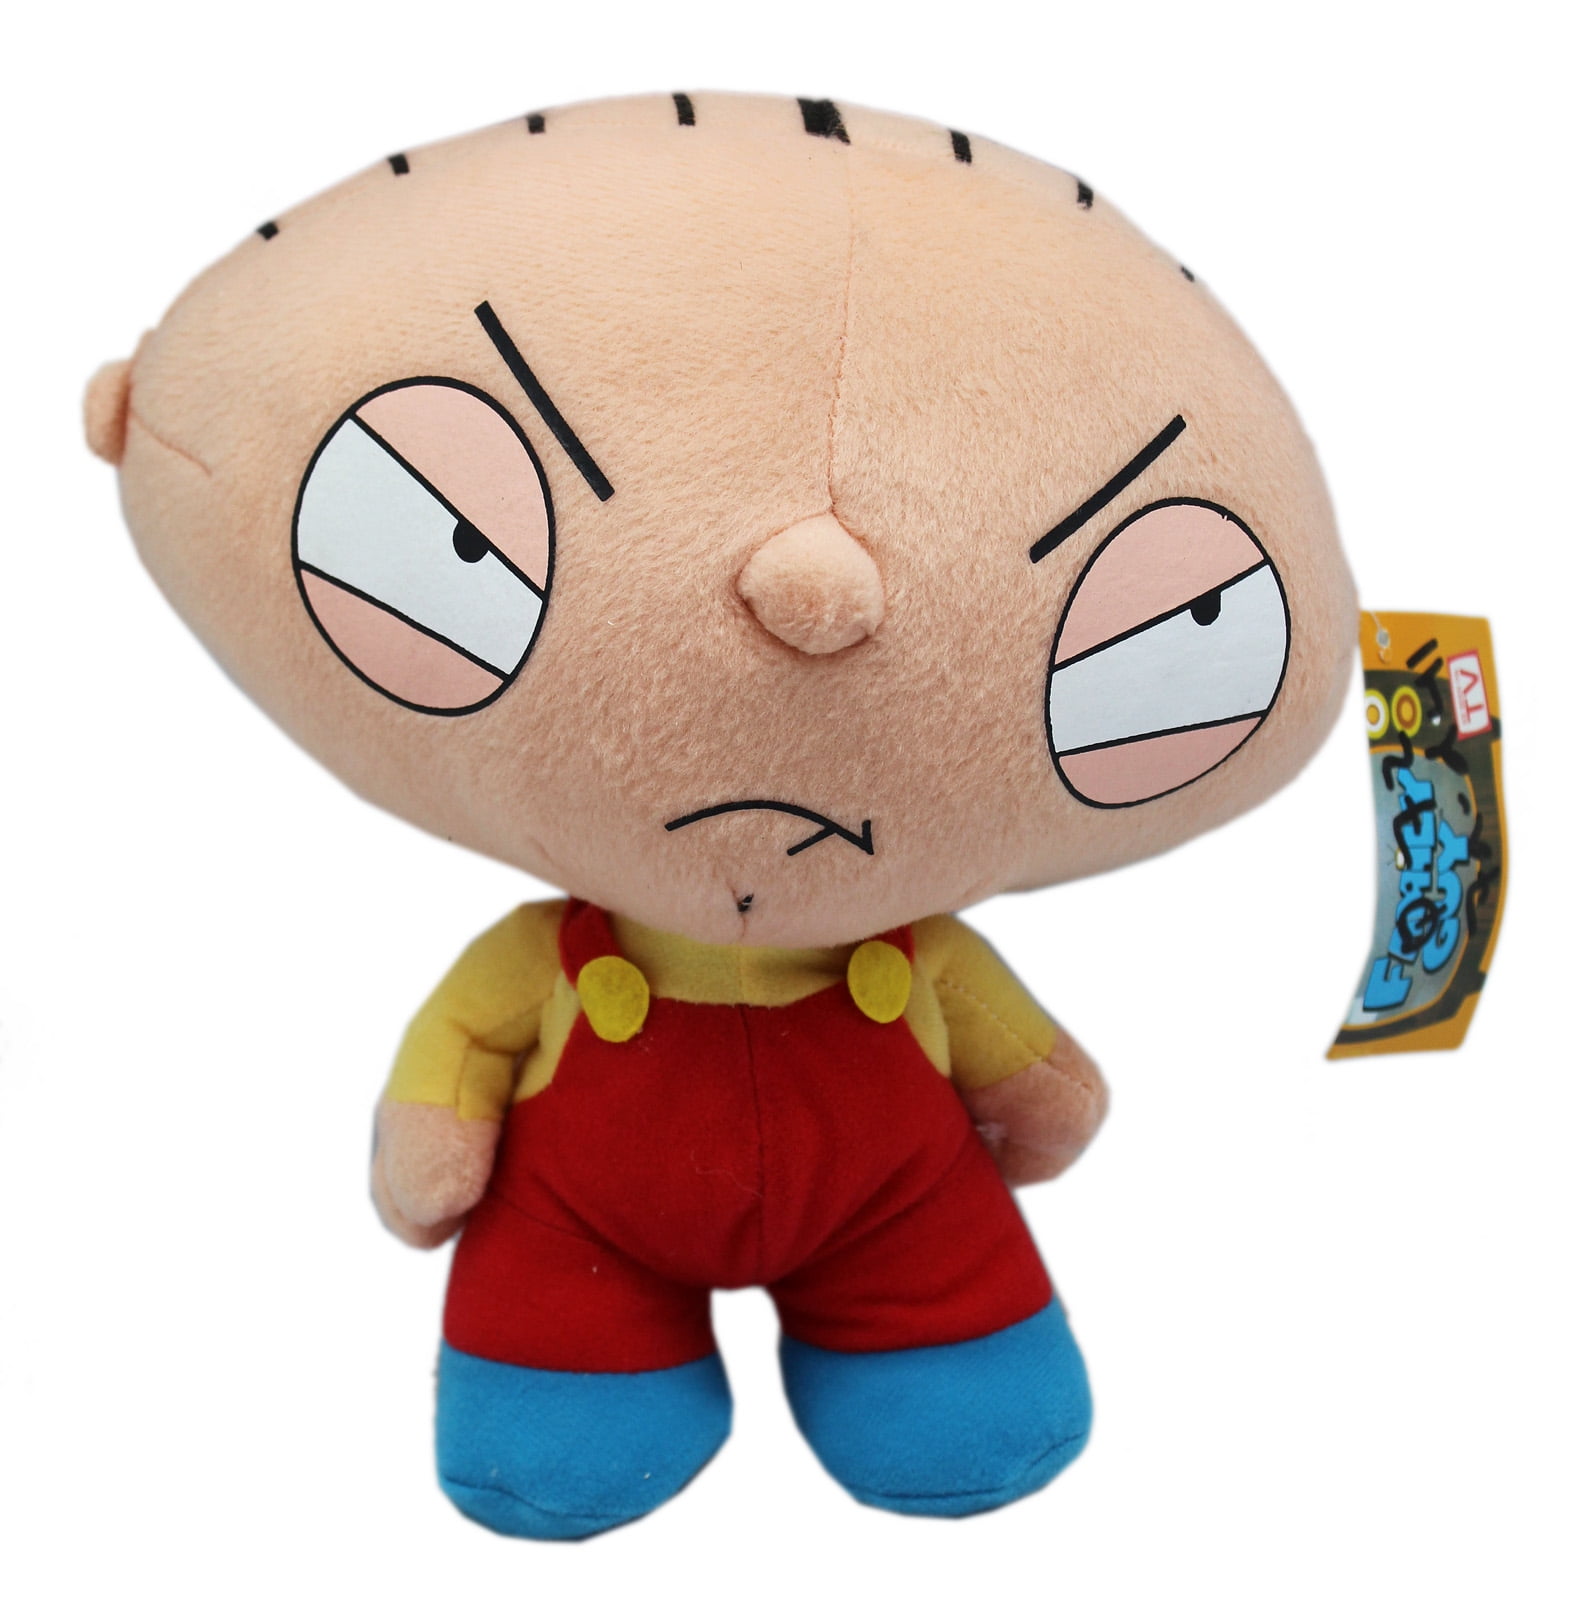 Family Guy Small Plush with Sound Stewie